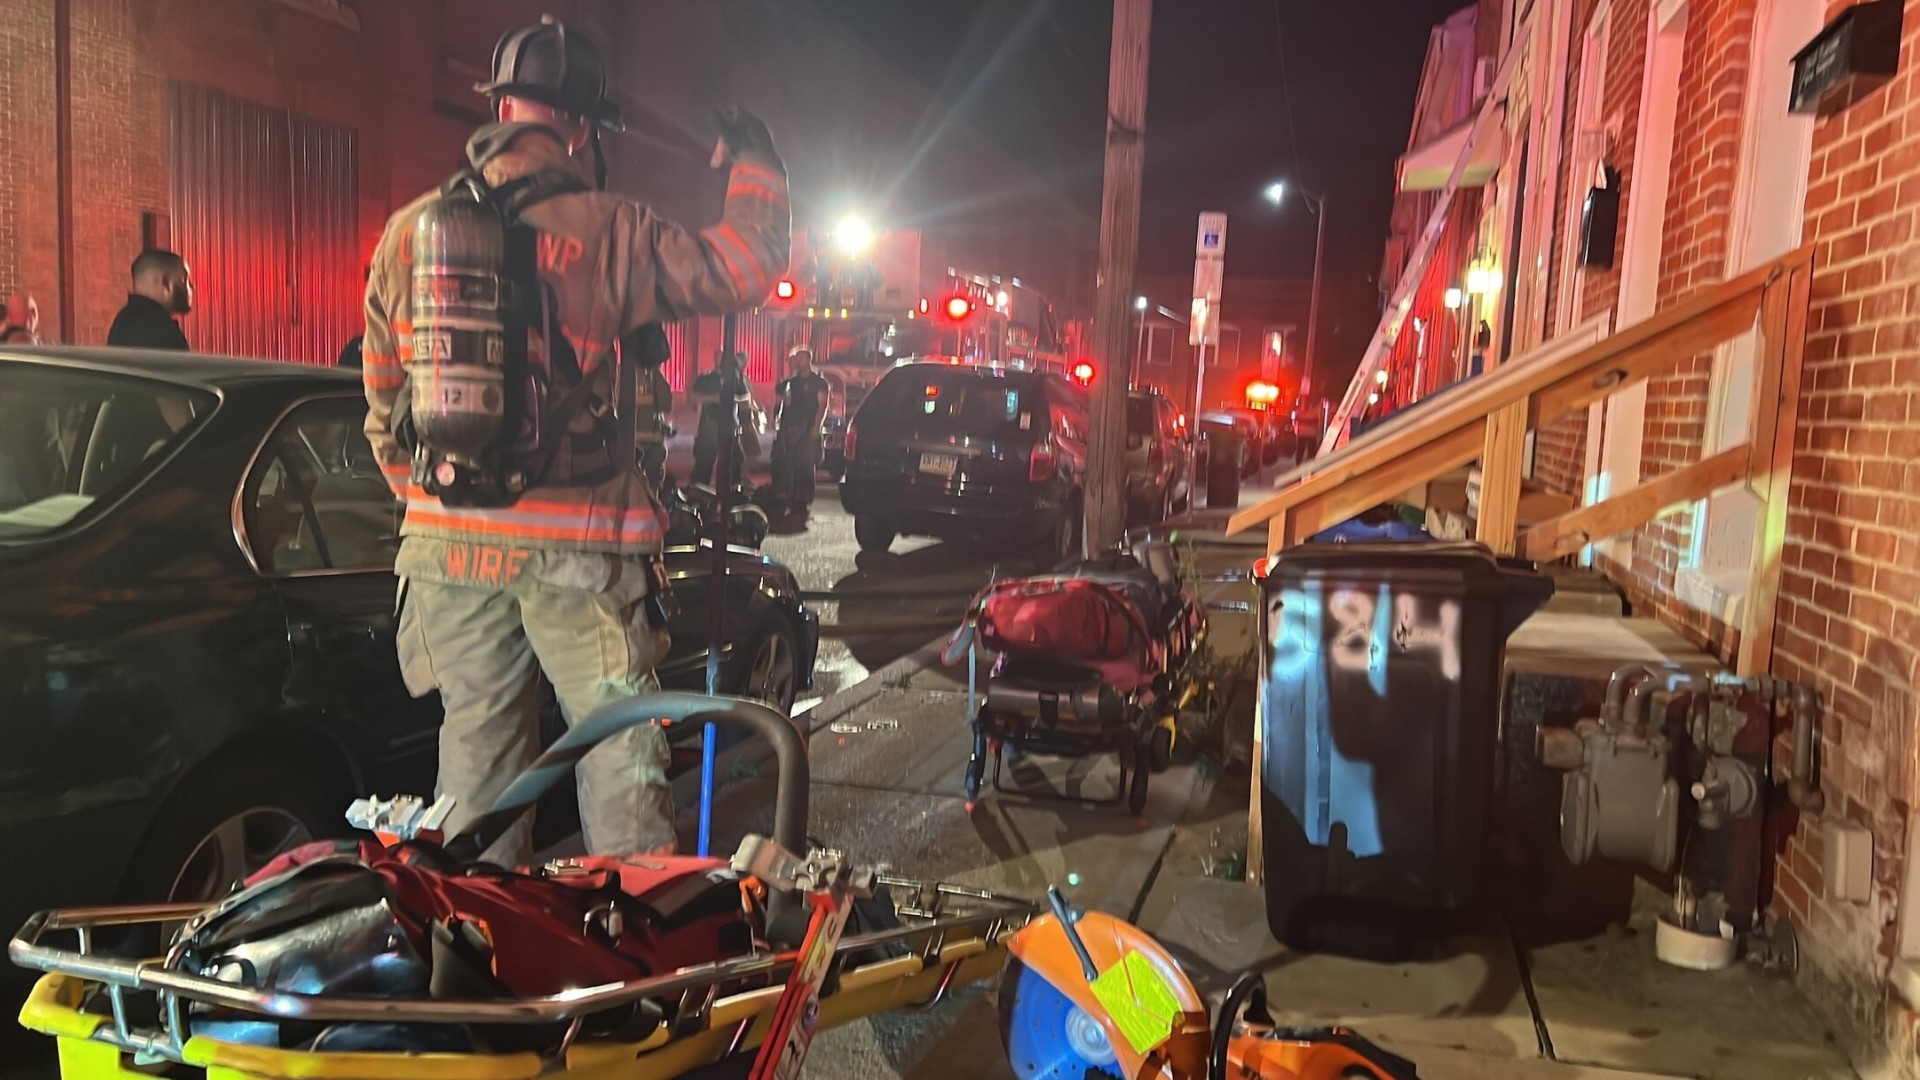 A 49-year-old man and a 3-year-old girl have died as a result of the Company Street fire, the York County Coroner's Office said.